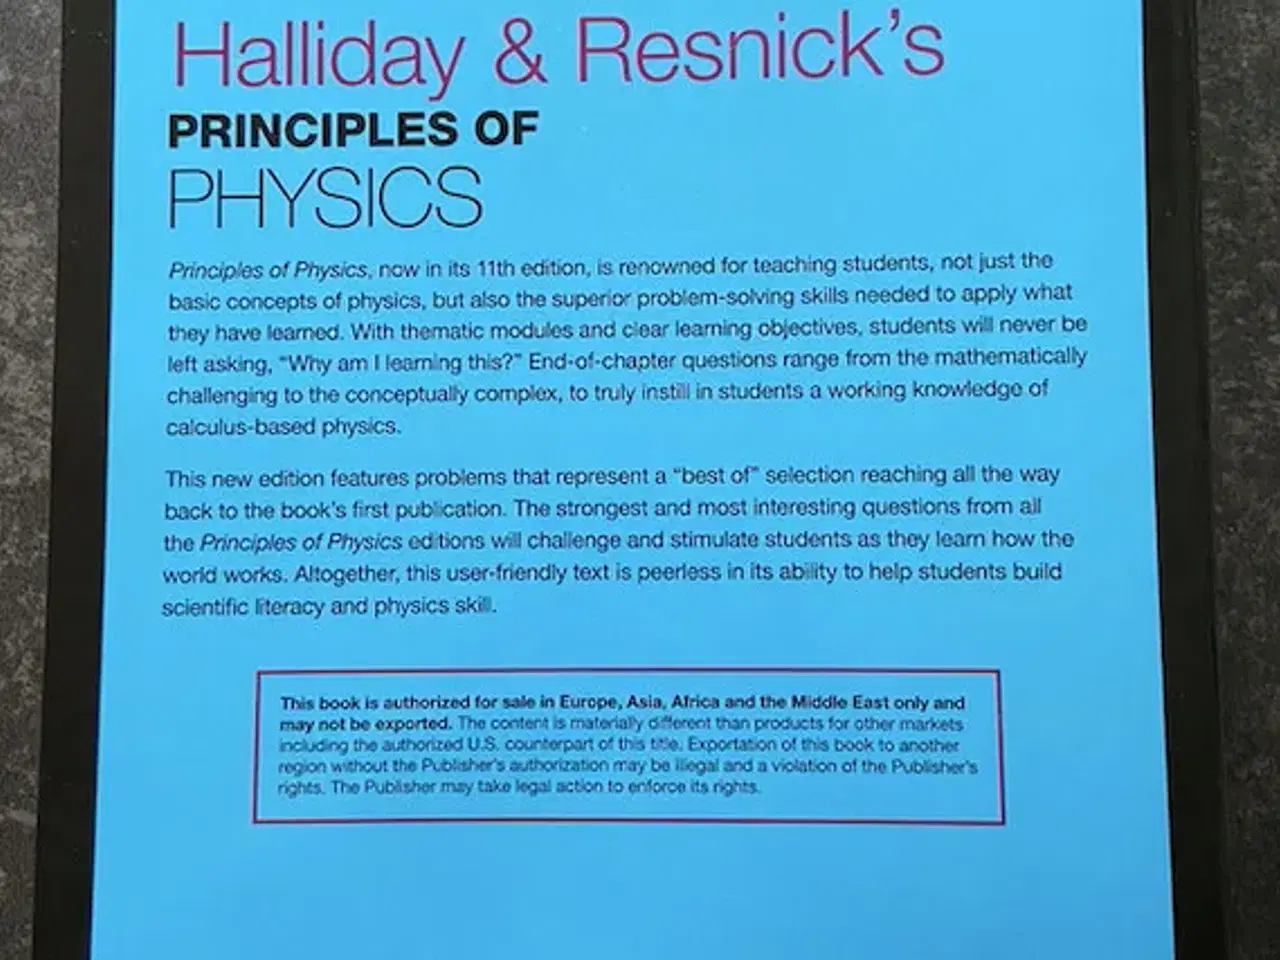 Billede 2 - Halliday and Resnick's Principles of Physics